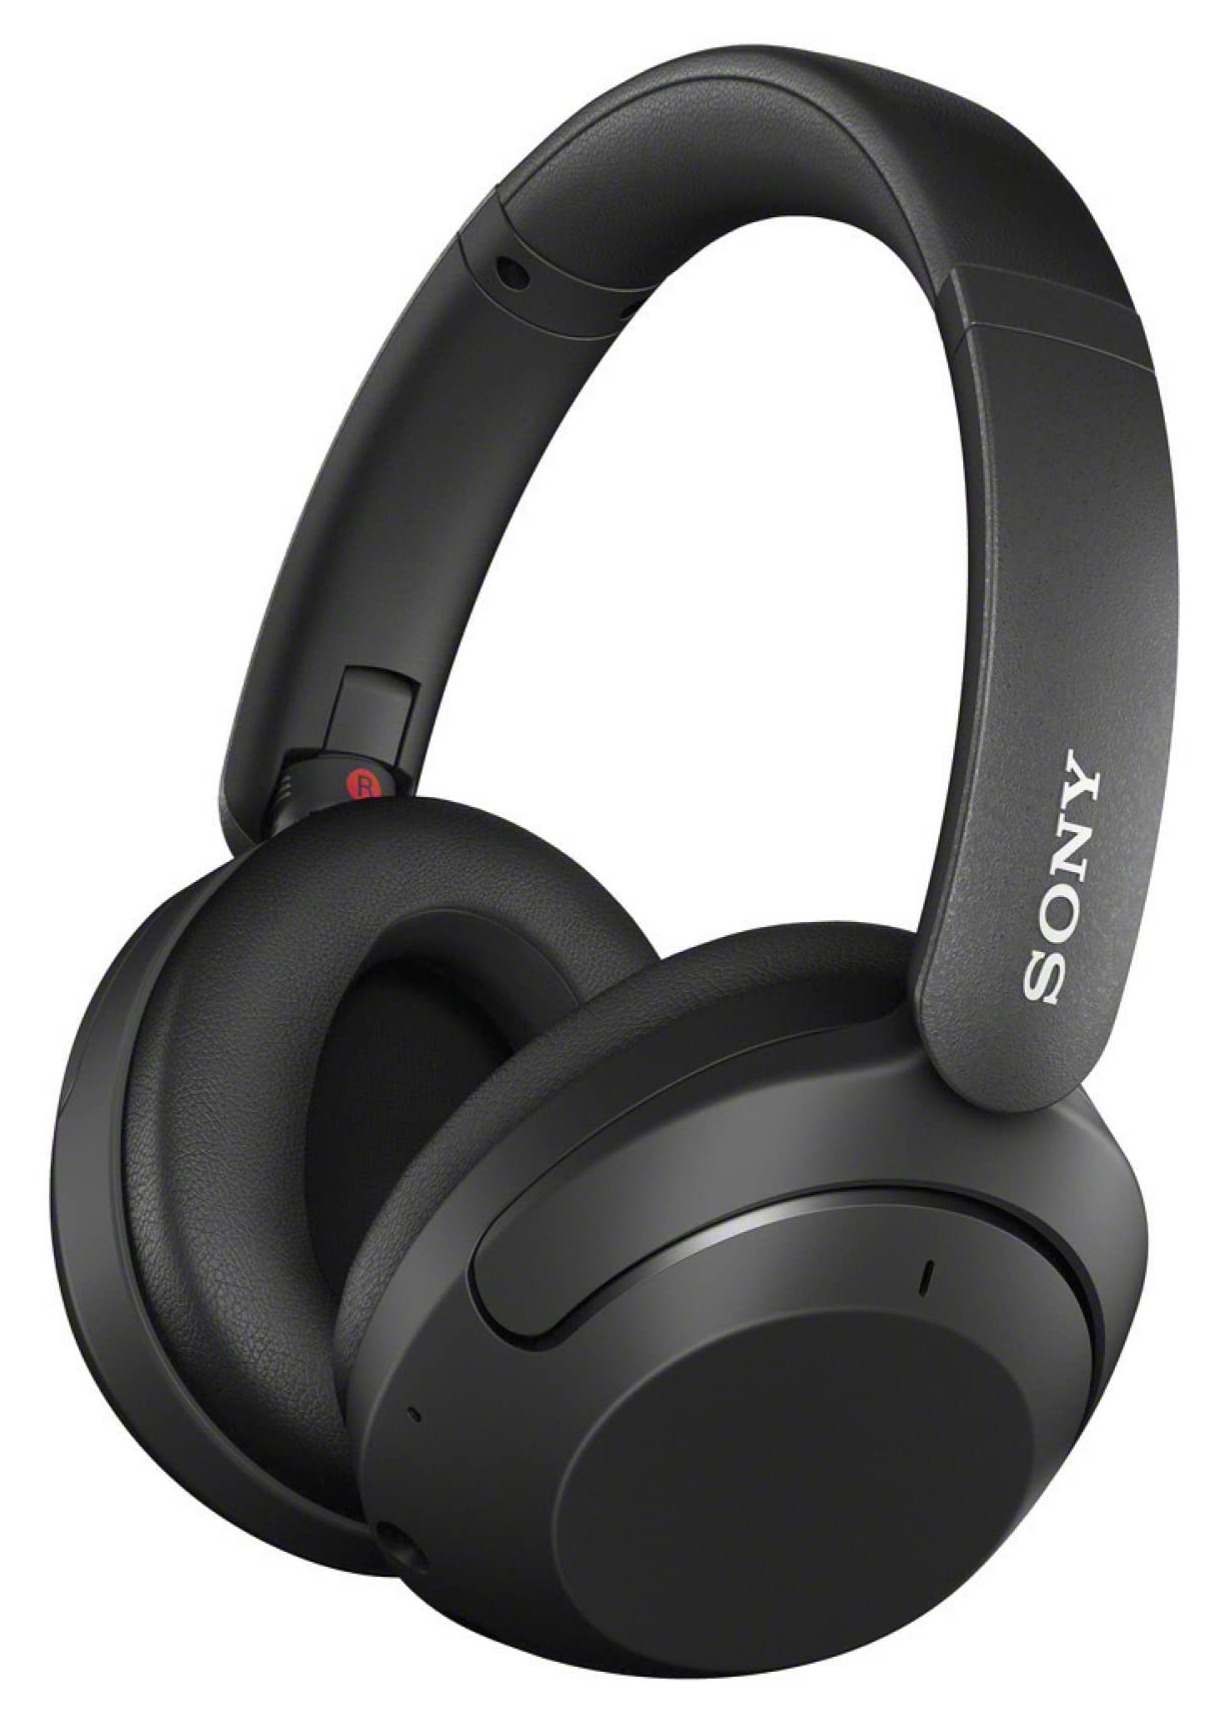 Refurbished Sony WH-XB910N EXTRA BASS Noise Cancelling Headphones $59.99 @ Amazon and Ebay